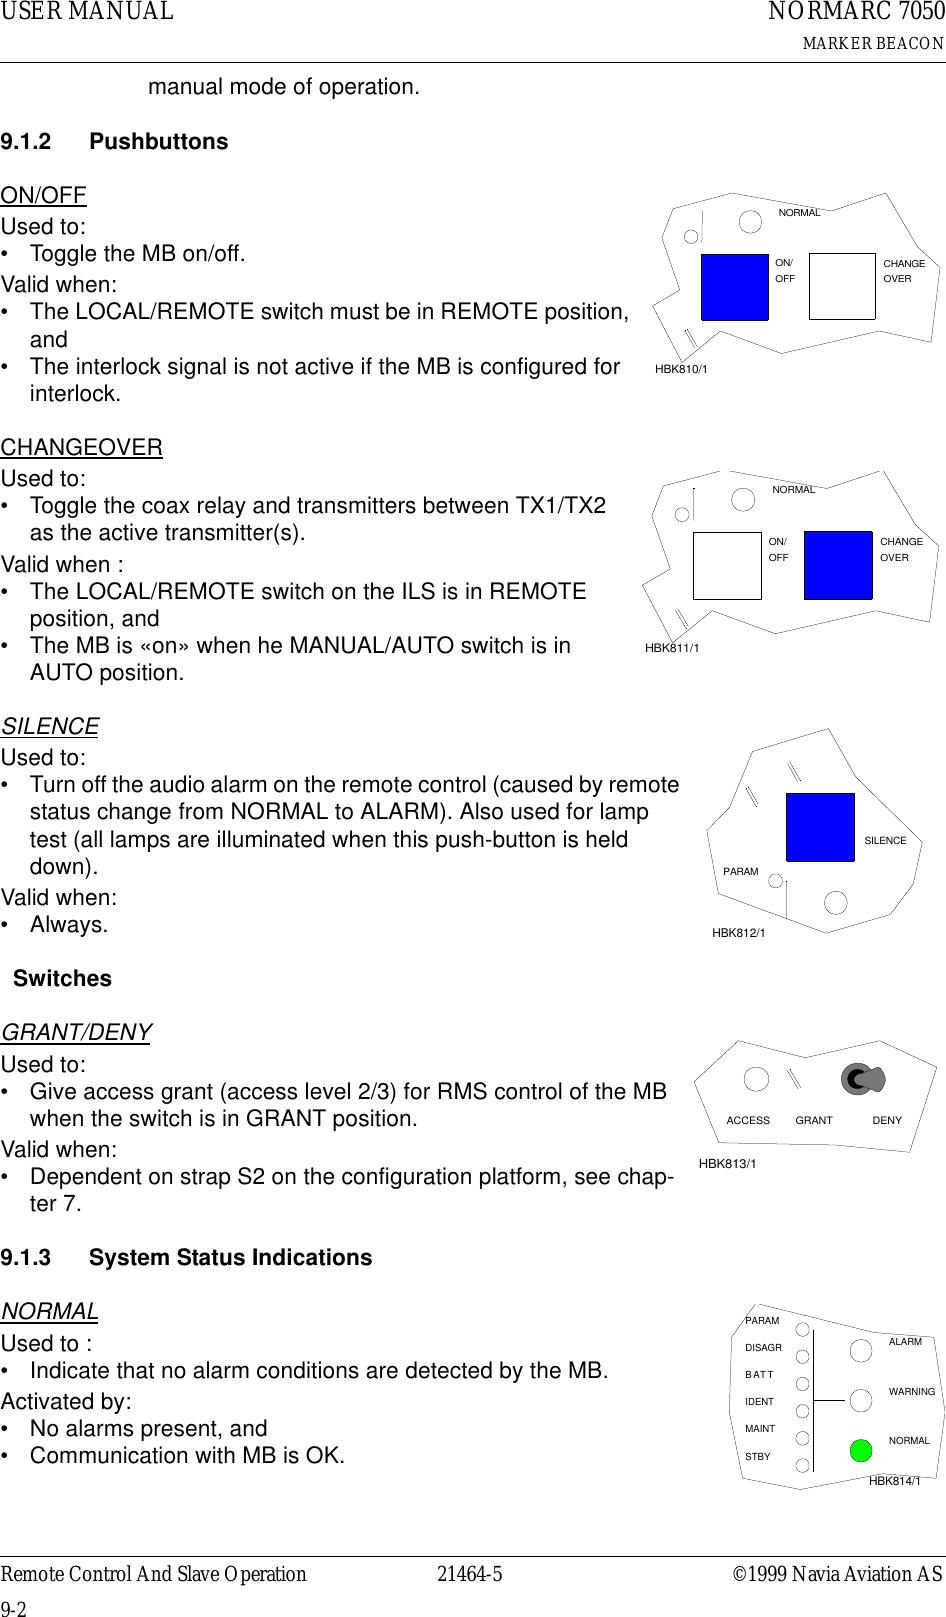 USER MANUAL9-221464-5NORMARC 7050MARKER BEACONRemote Control And Slave Operation ©1999 Navia Aviation ASmanual mode of operation.    9.1.2 PushbuttonsON/OFFUsed to:• Toggle the MB on/off. Valid when:• The LOCAL/REMOTE switch must be in REMOTE position, and• The interlock signal is not active if the MB is configured for interlock.CHANGEOVERUsed to:• Toggle the coax relay and transmitters between TX1/TX2 as the active transmitter(s).Valid when :• The LOCAL/REMOTE switch on the ILS is in REMOTE position, and• The MB is «on» when he MANUAL/AUTO switch is in AUTO position.SILENCEUsed to:• Turn off the audio alarm on the remote control (caused by remote status change from NORMAL to ALARM). Also used for lamp test (all lamps are illuminated when this push-button is held down).Valid when:•Always.  SwitchesGRANT/DENYUsed to:• Give access grant (access level 2/3) for RMS control of the MB when the switch is in GRANT position.Valid when:• Dependent on strap S2 on the configuration platform, see chap-ter 7.9.1.3 System Status IndicationsNORMALUsed to :• Indicate that no alarm conditions are detected by the MB.Activated by:• No alarms present, and• Communication with MB is OK.OFFON/NORMALOVERCHANGEHBK810/1OFFON/NORMALOVERCHANGEHBK811/1PARAMSILENCEHBK812/1ACCESS GRANT DENYHBK813/1MAINTSTBYNORMALTIDENTATBARAMDISAGRPWARNINGALARMHBK814/1